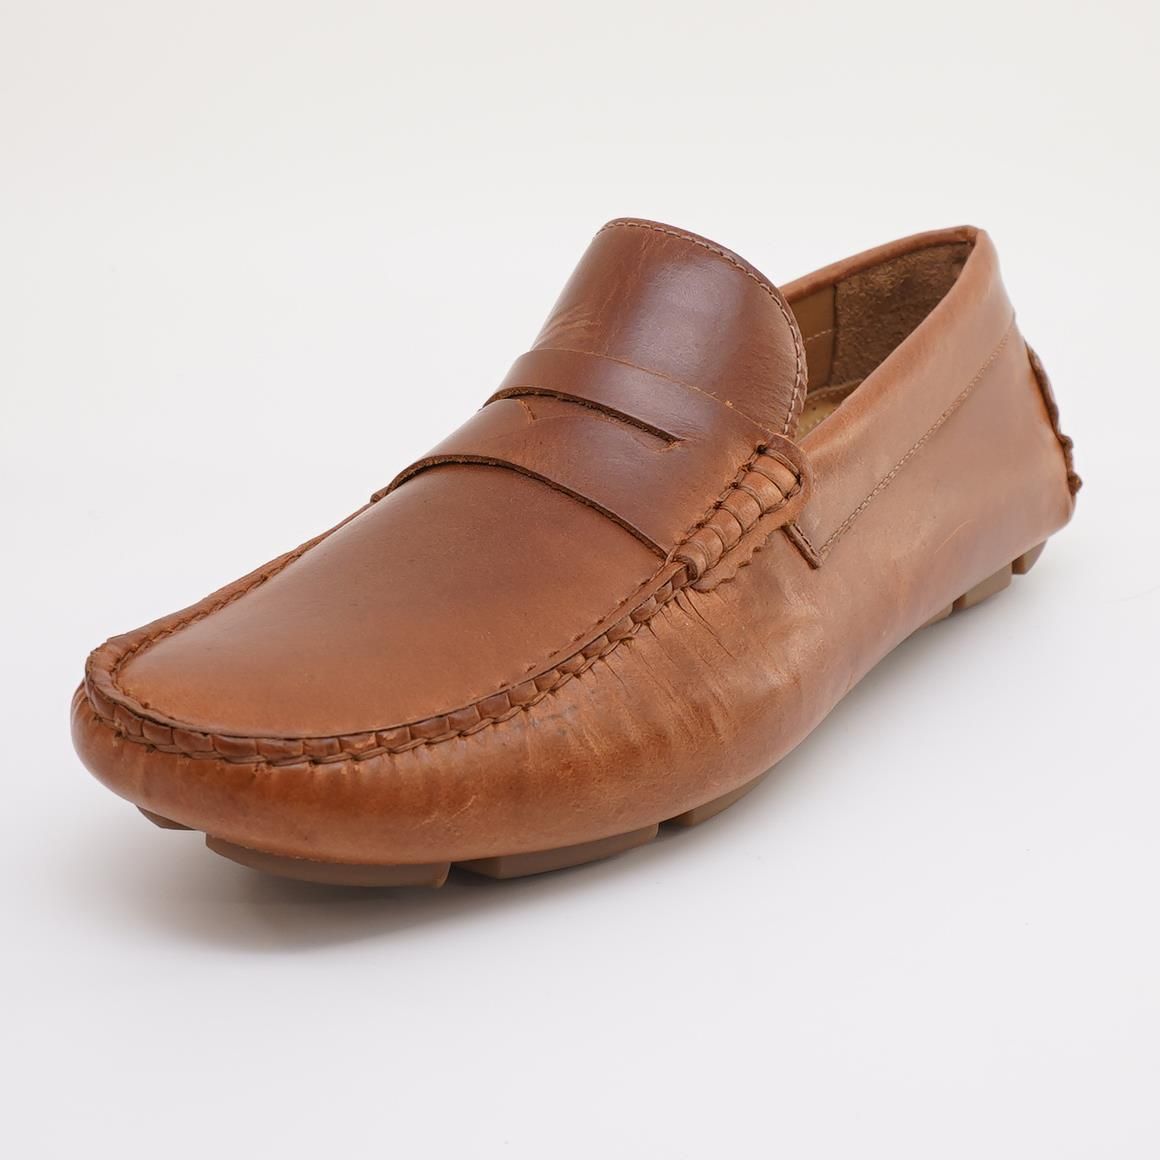 LV Glove Loafer - Luxury Loafers and Moccasins - Shoes